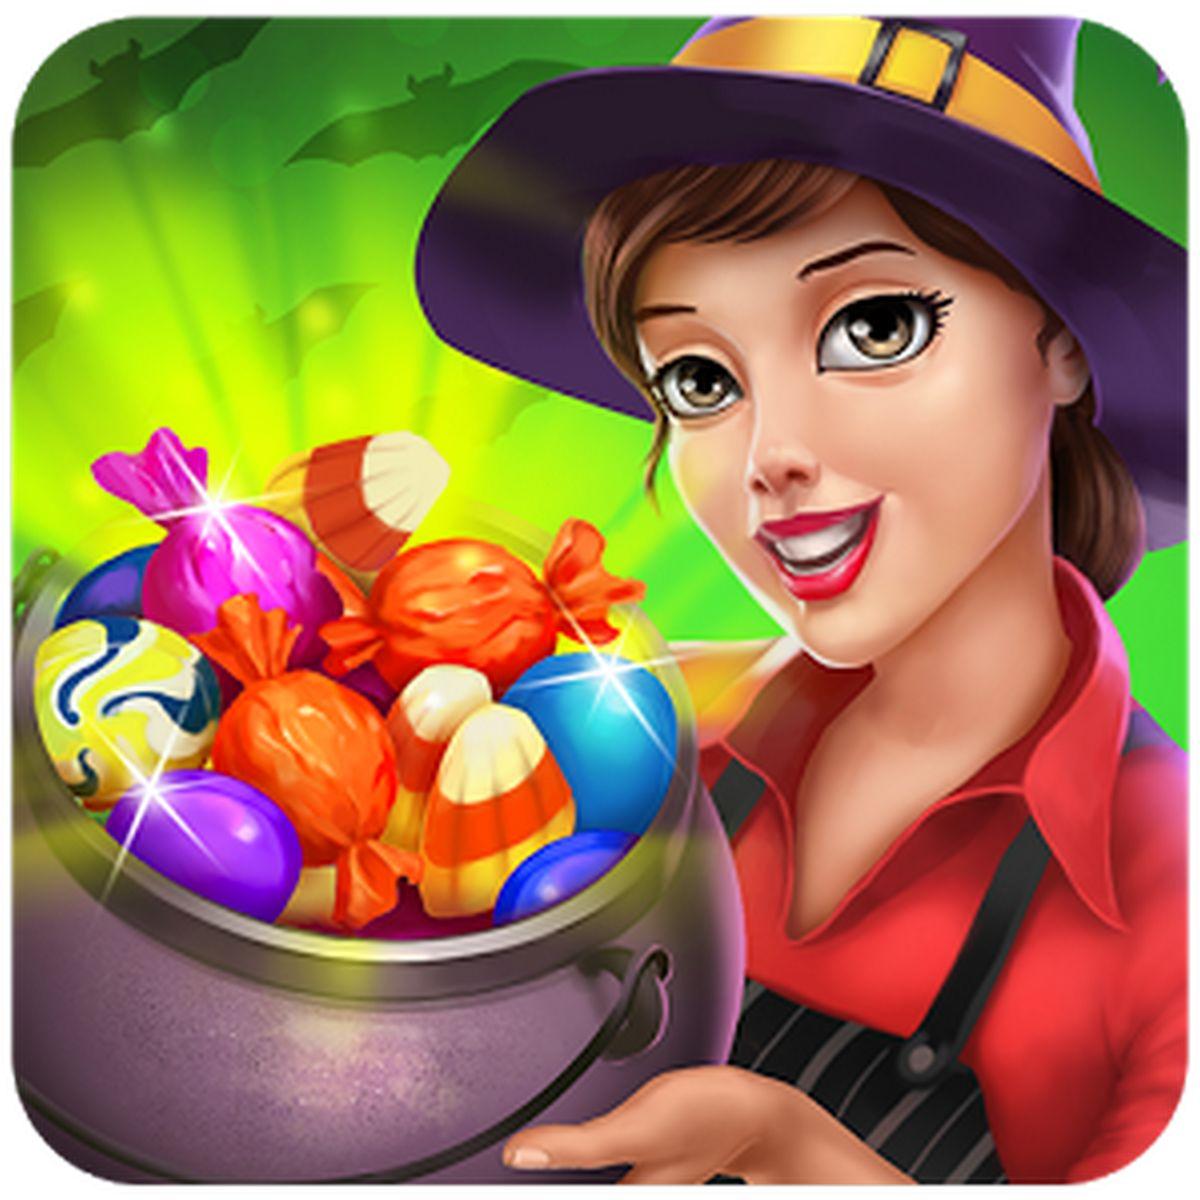 Food Truck Chef: Cooking Game APK MOD v1.9.9 (Dinero infinito)